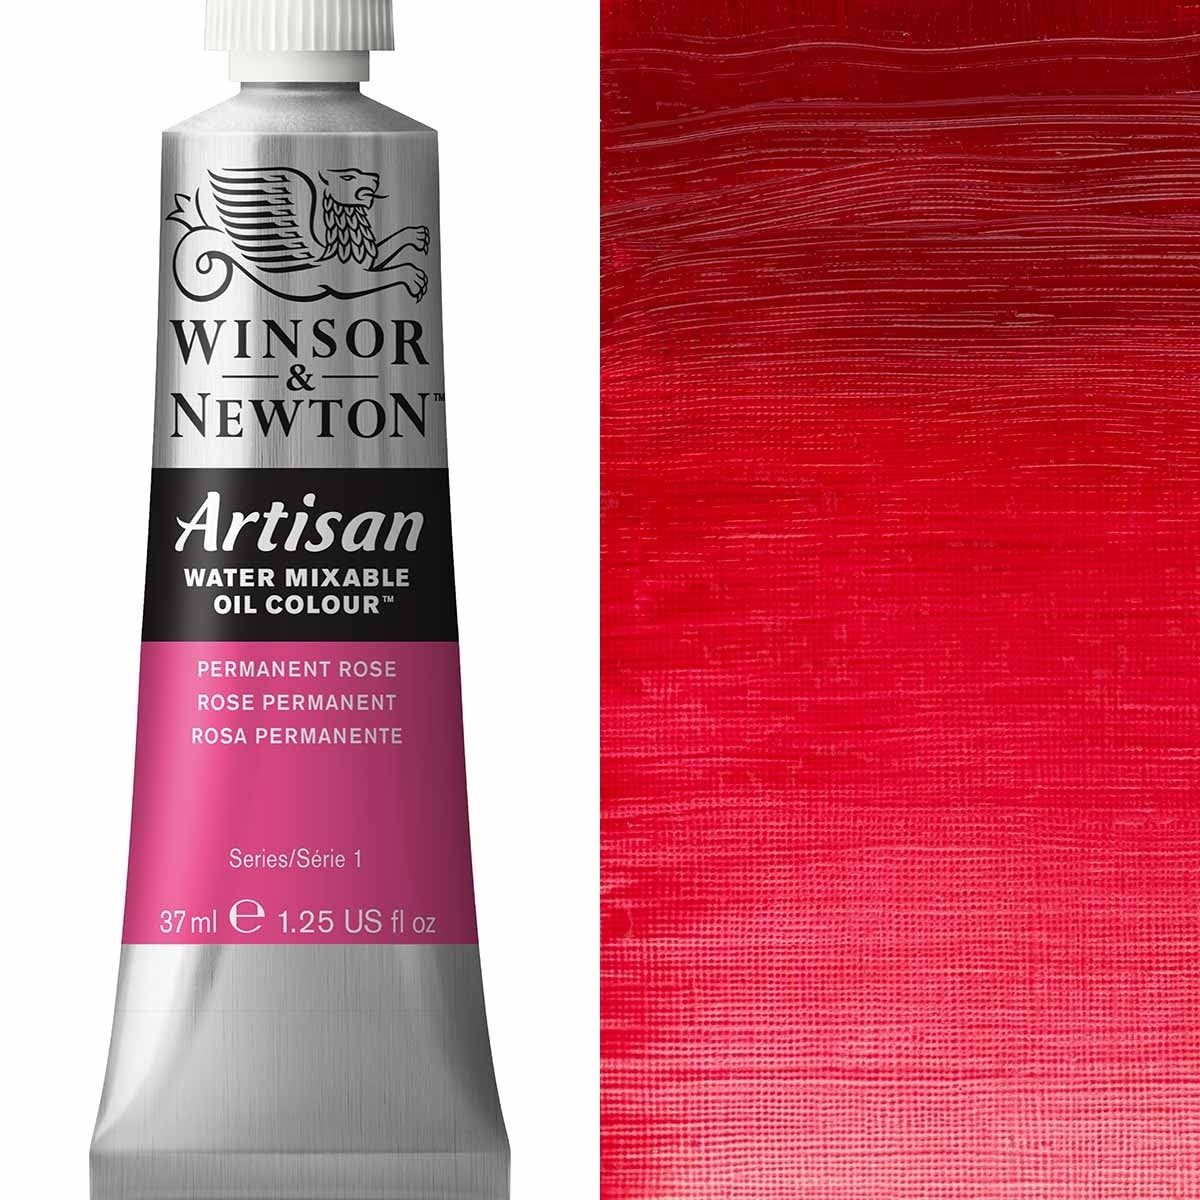 Winsor and Newton - Artisan Oil Colour Watermixable - 37ml - Permanent Rose